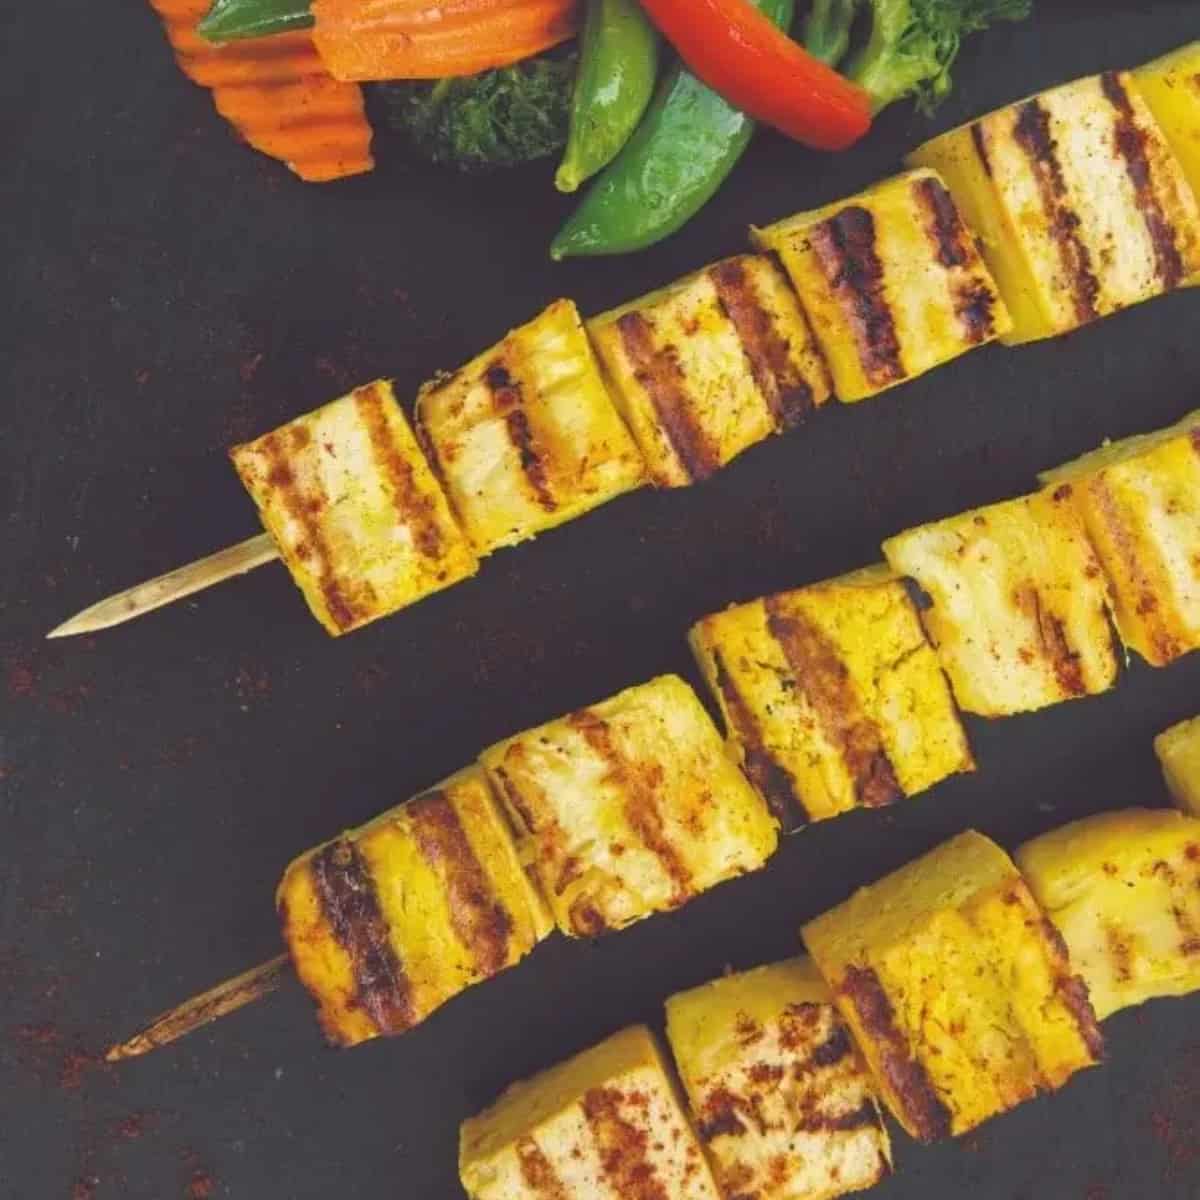 tofu grilled to perfection on skewers with veggies off to side.